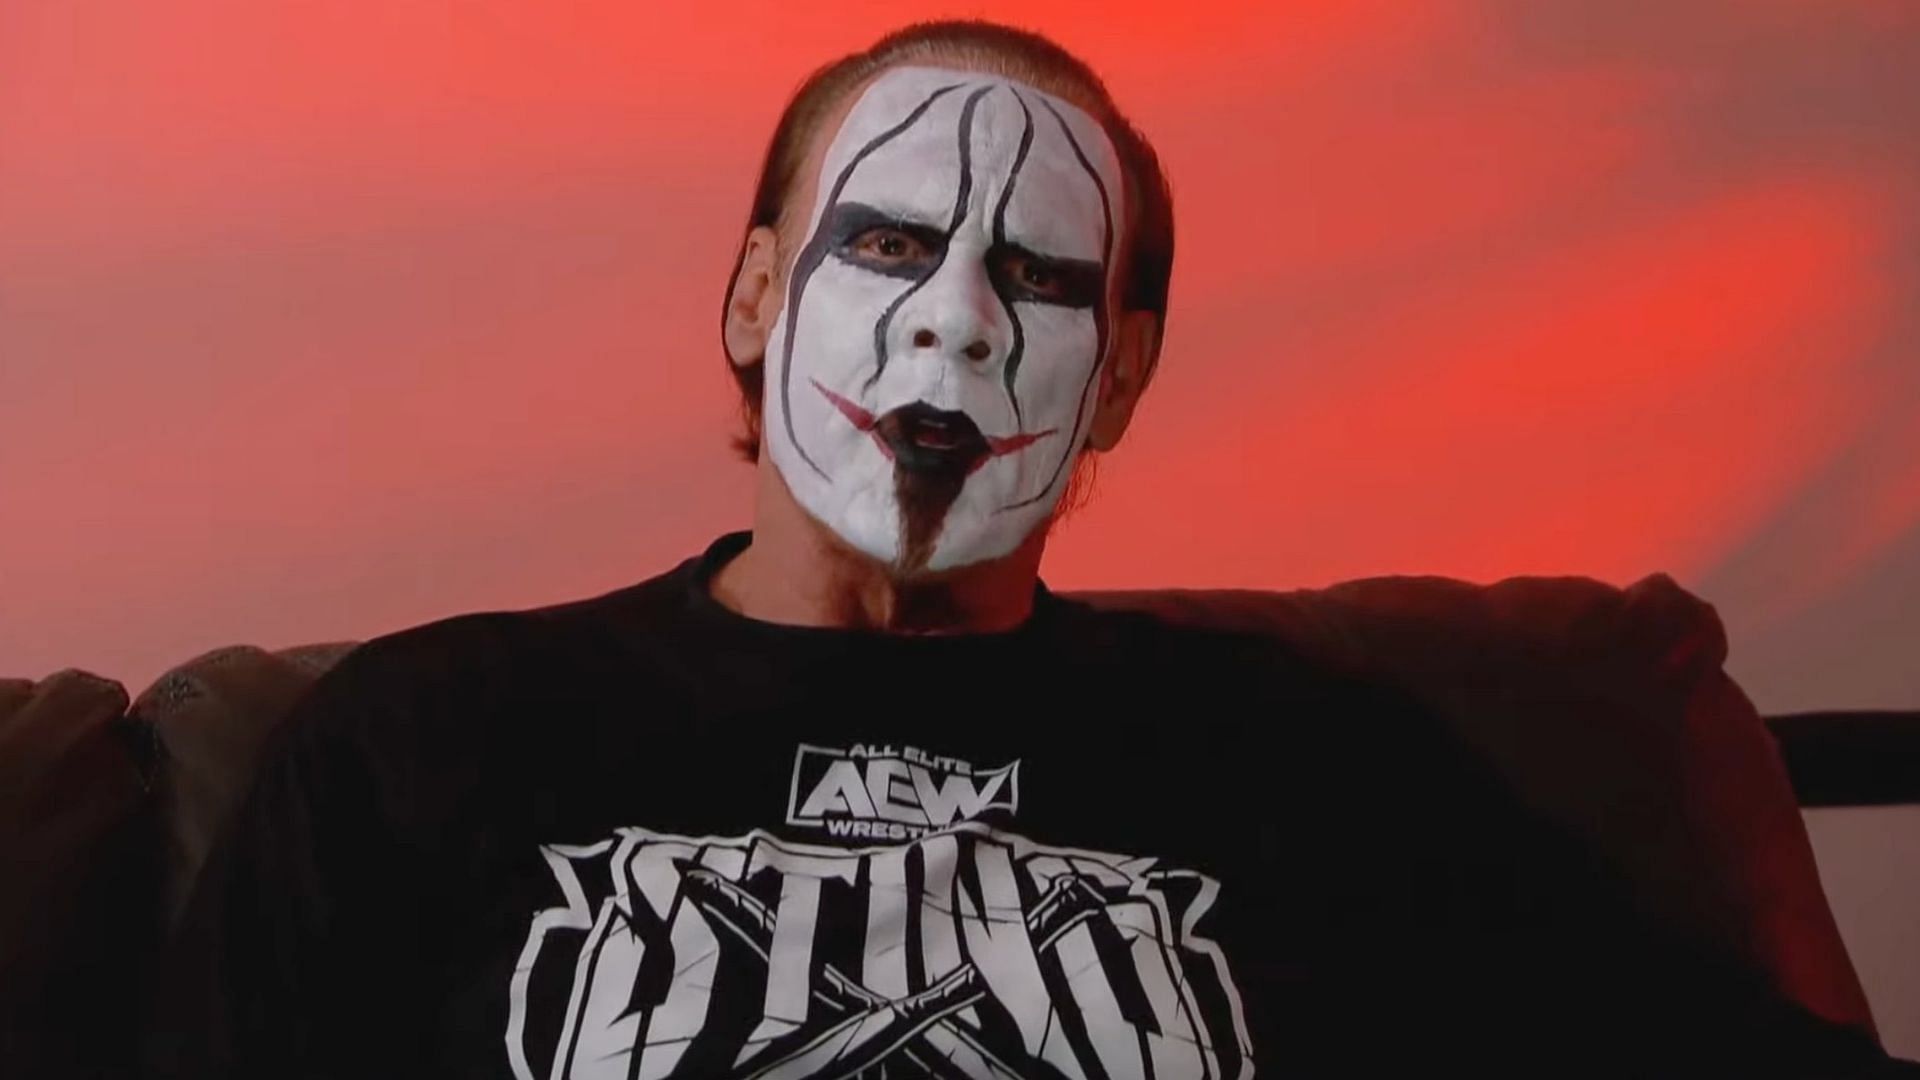 Joker Sting during a promo. Image Credits: Twitter - @WweDeese